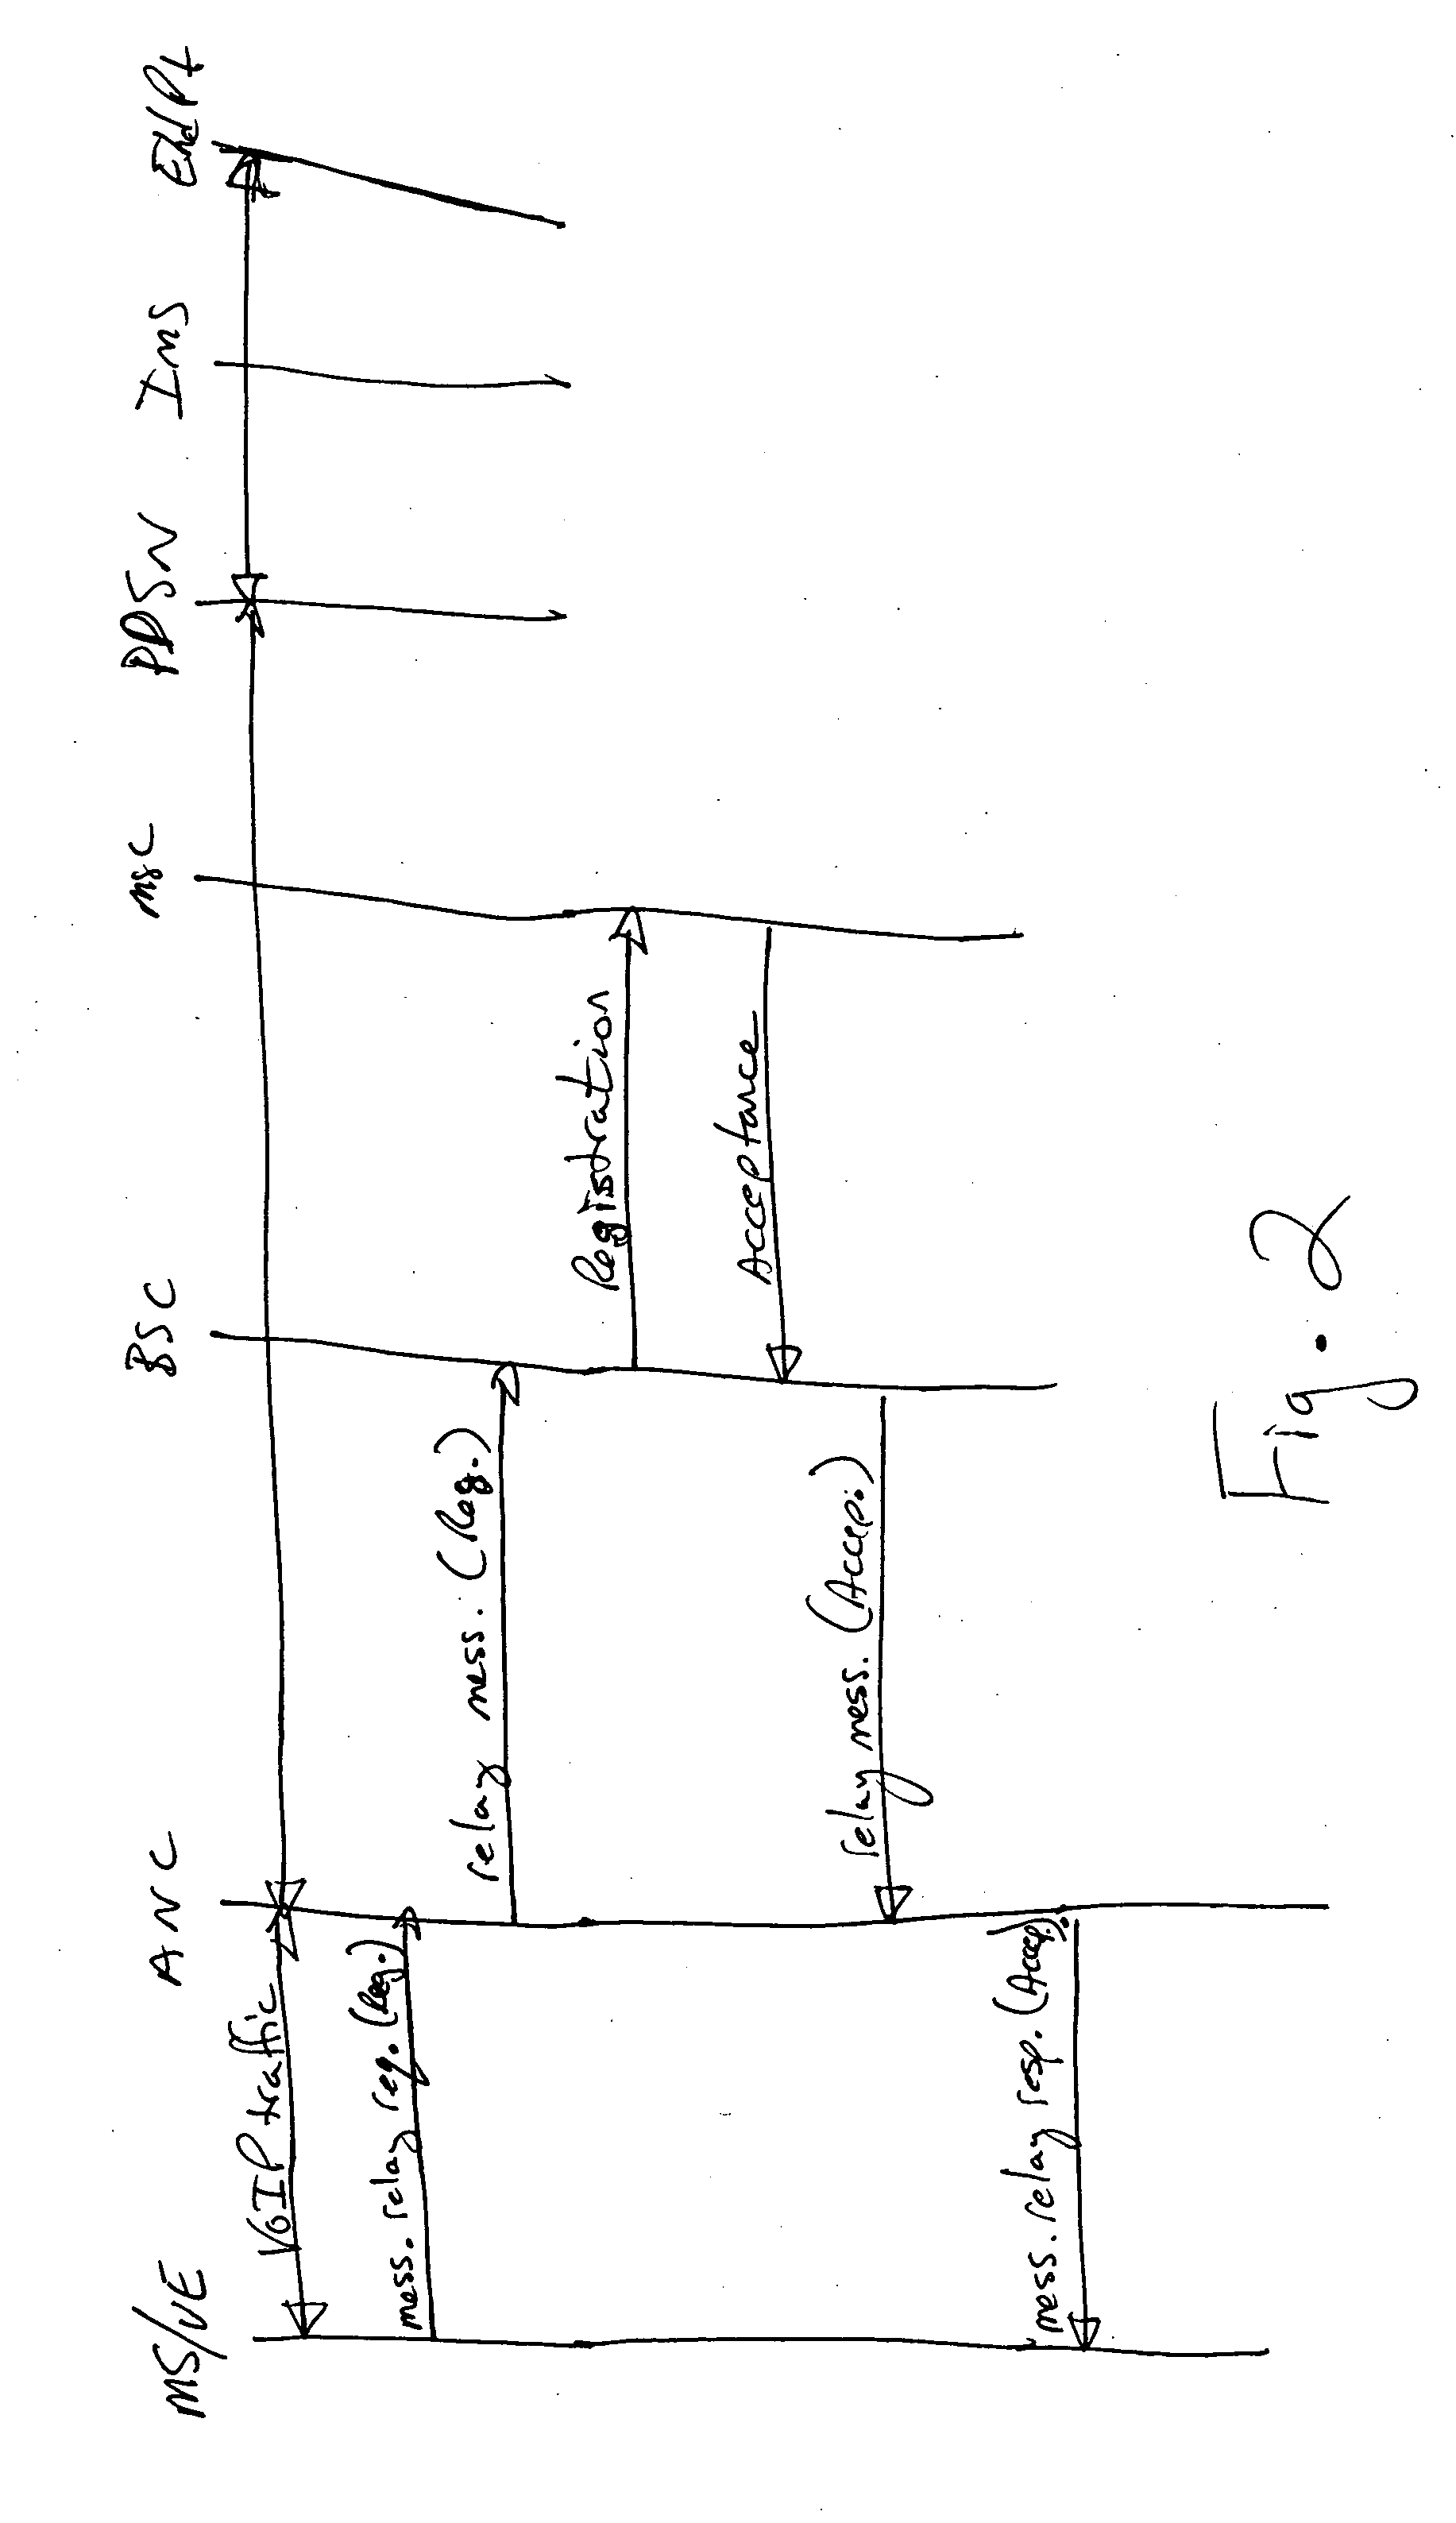 Method of transferring call transition messages between network controllers of different radio technologies